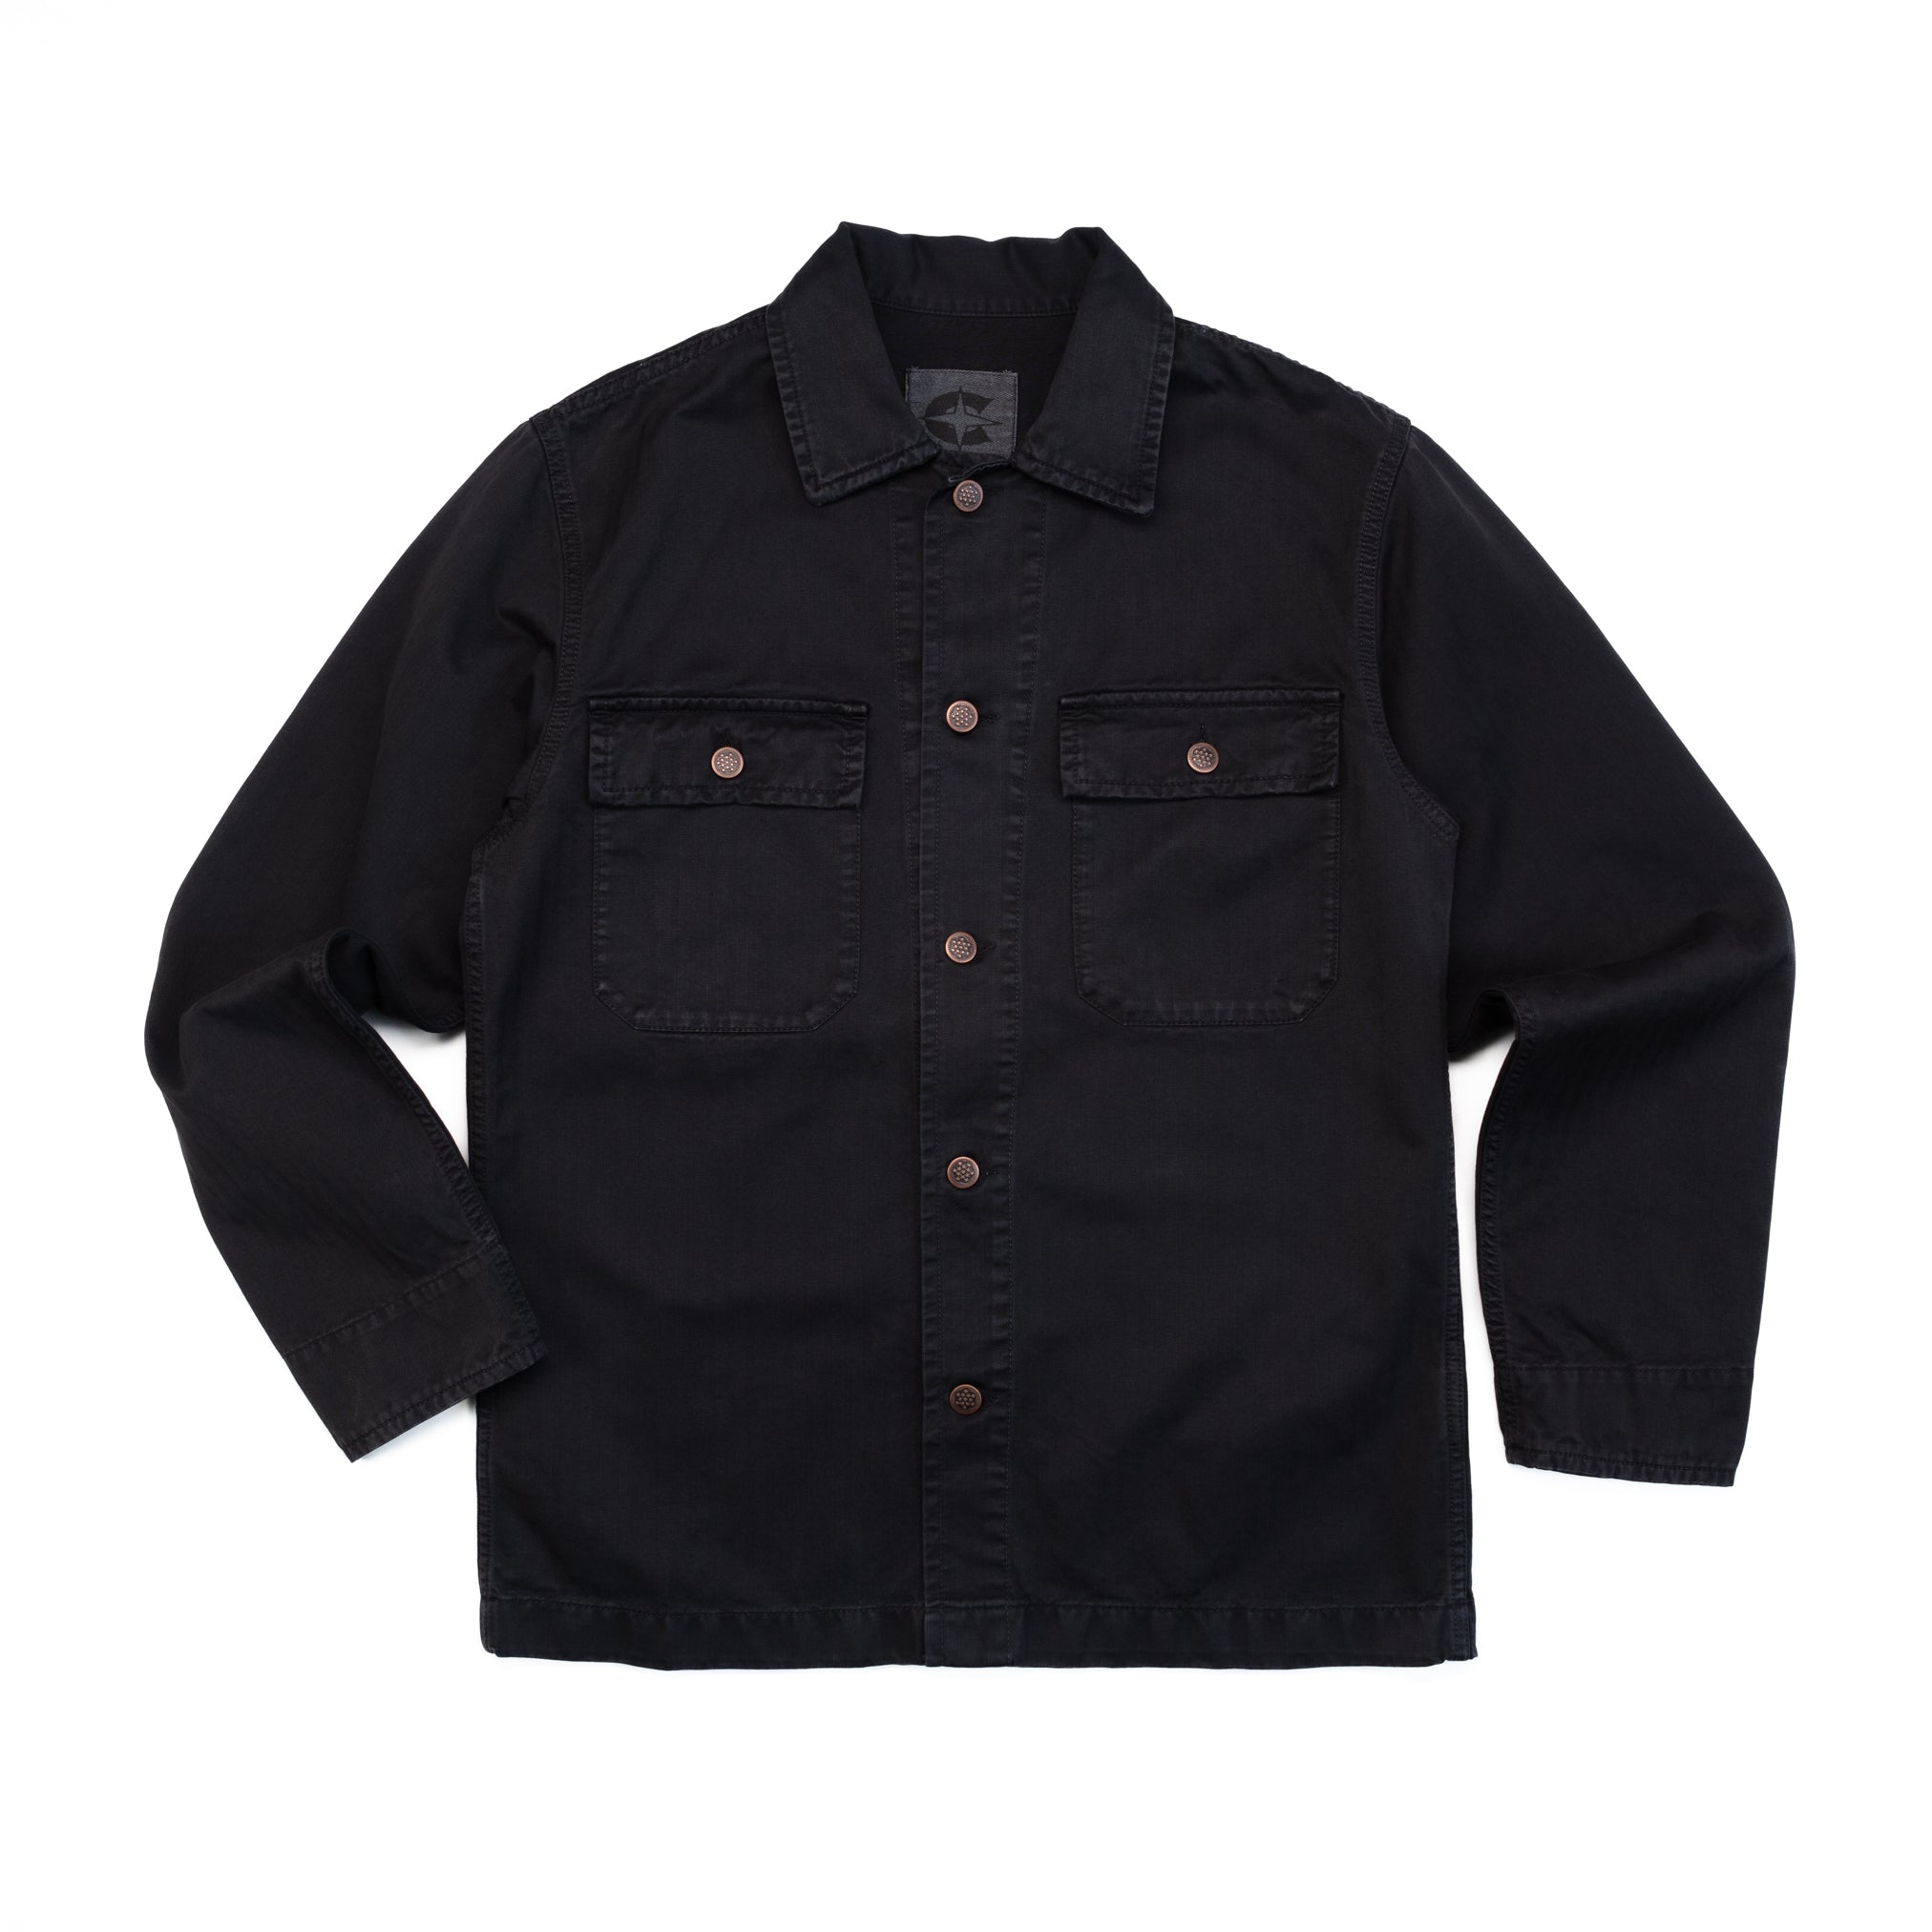 Willy's Field Shirt in Faded Black HBT